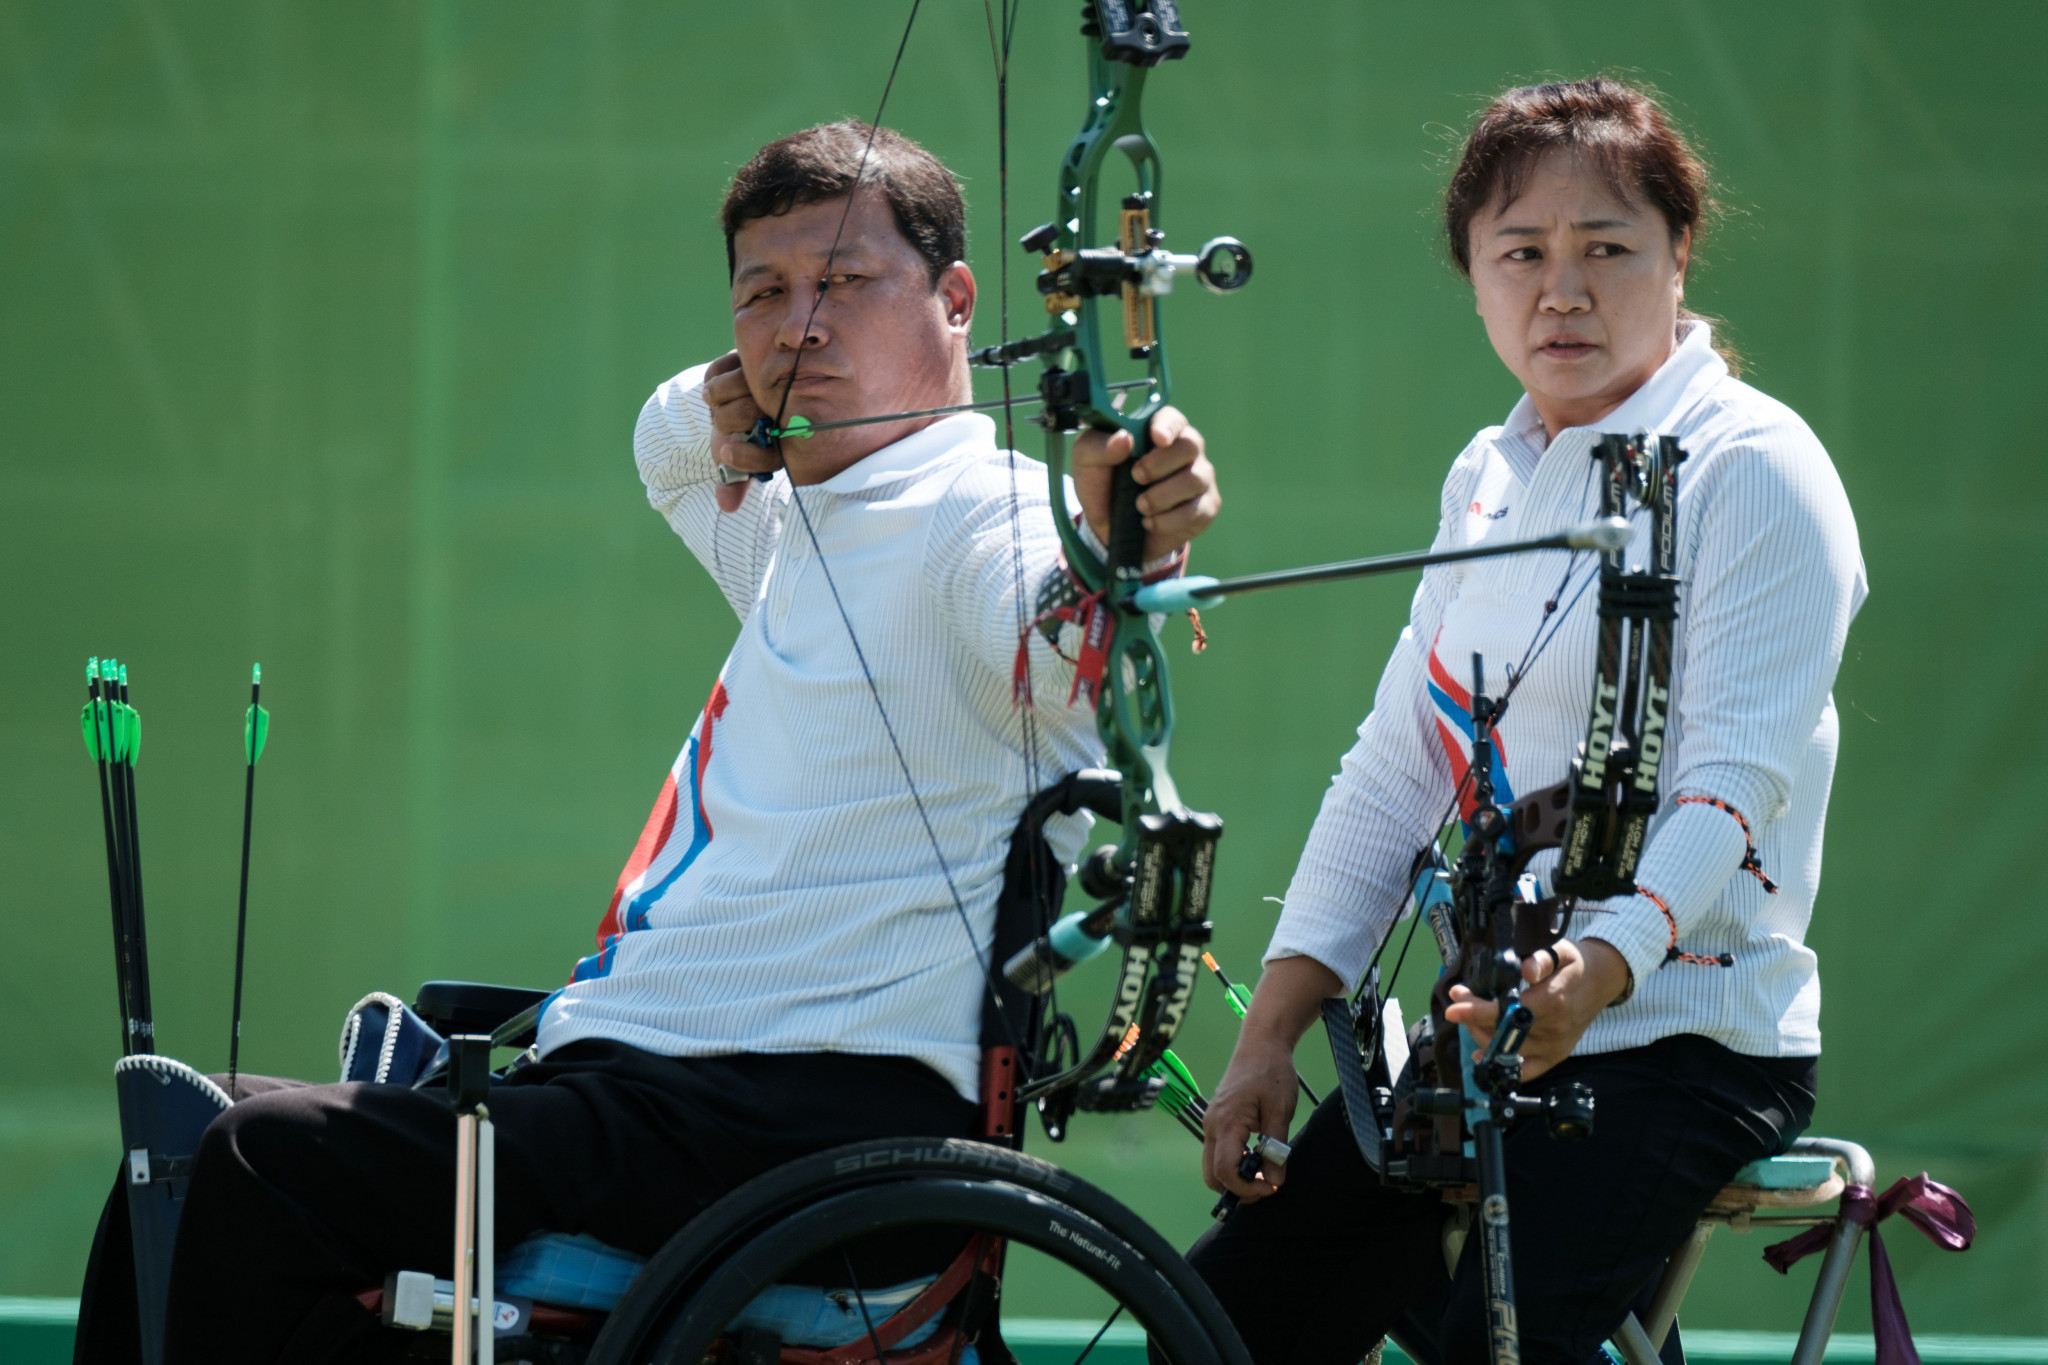 First archery medals decided at IWAS World Games